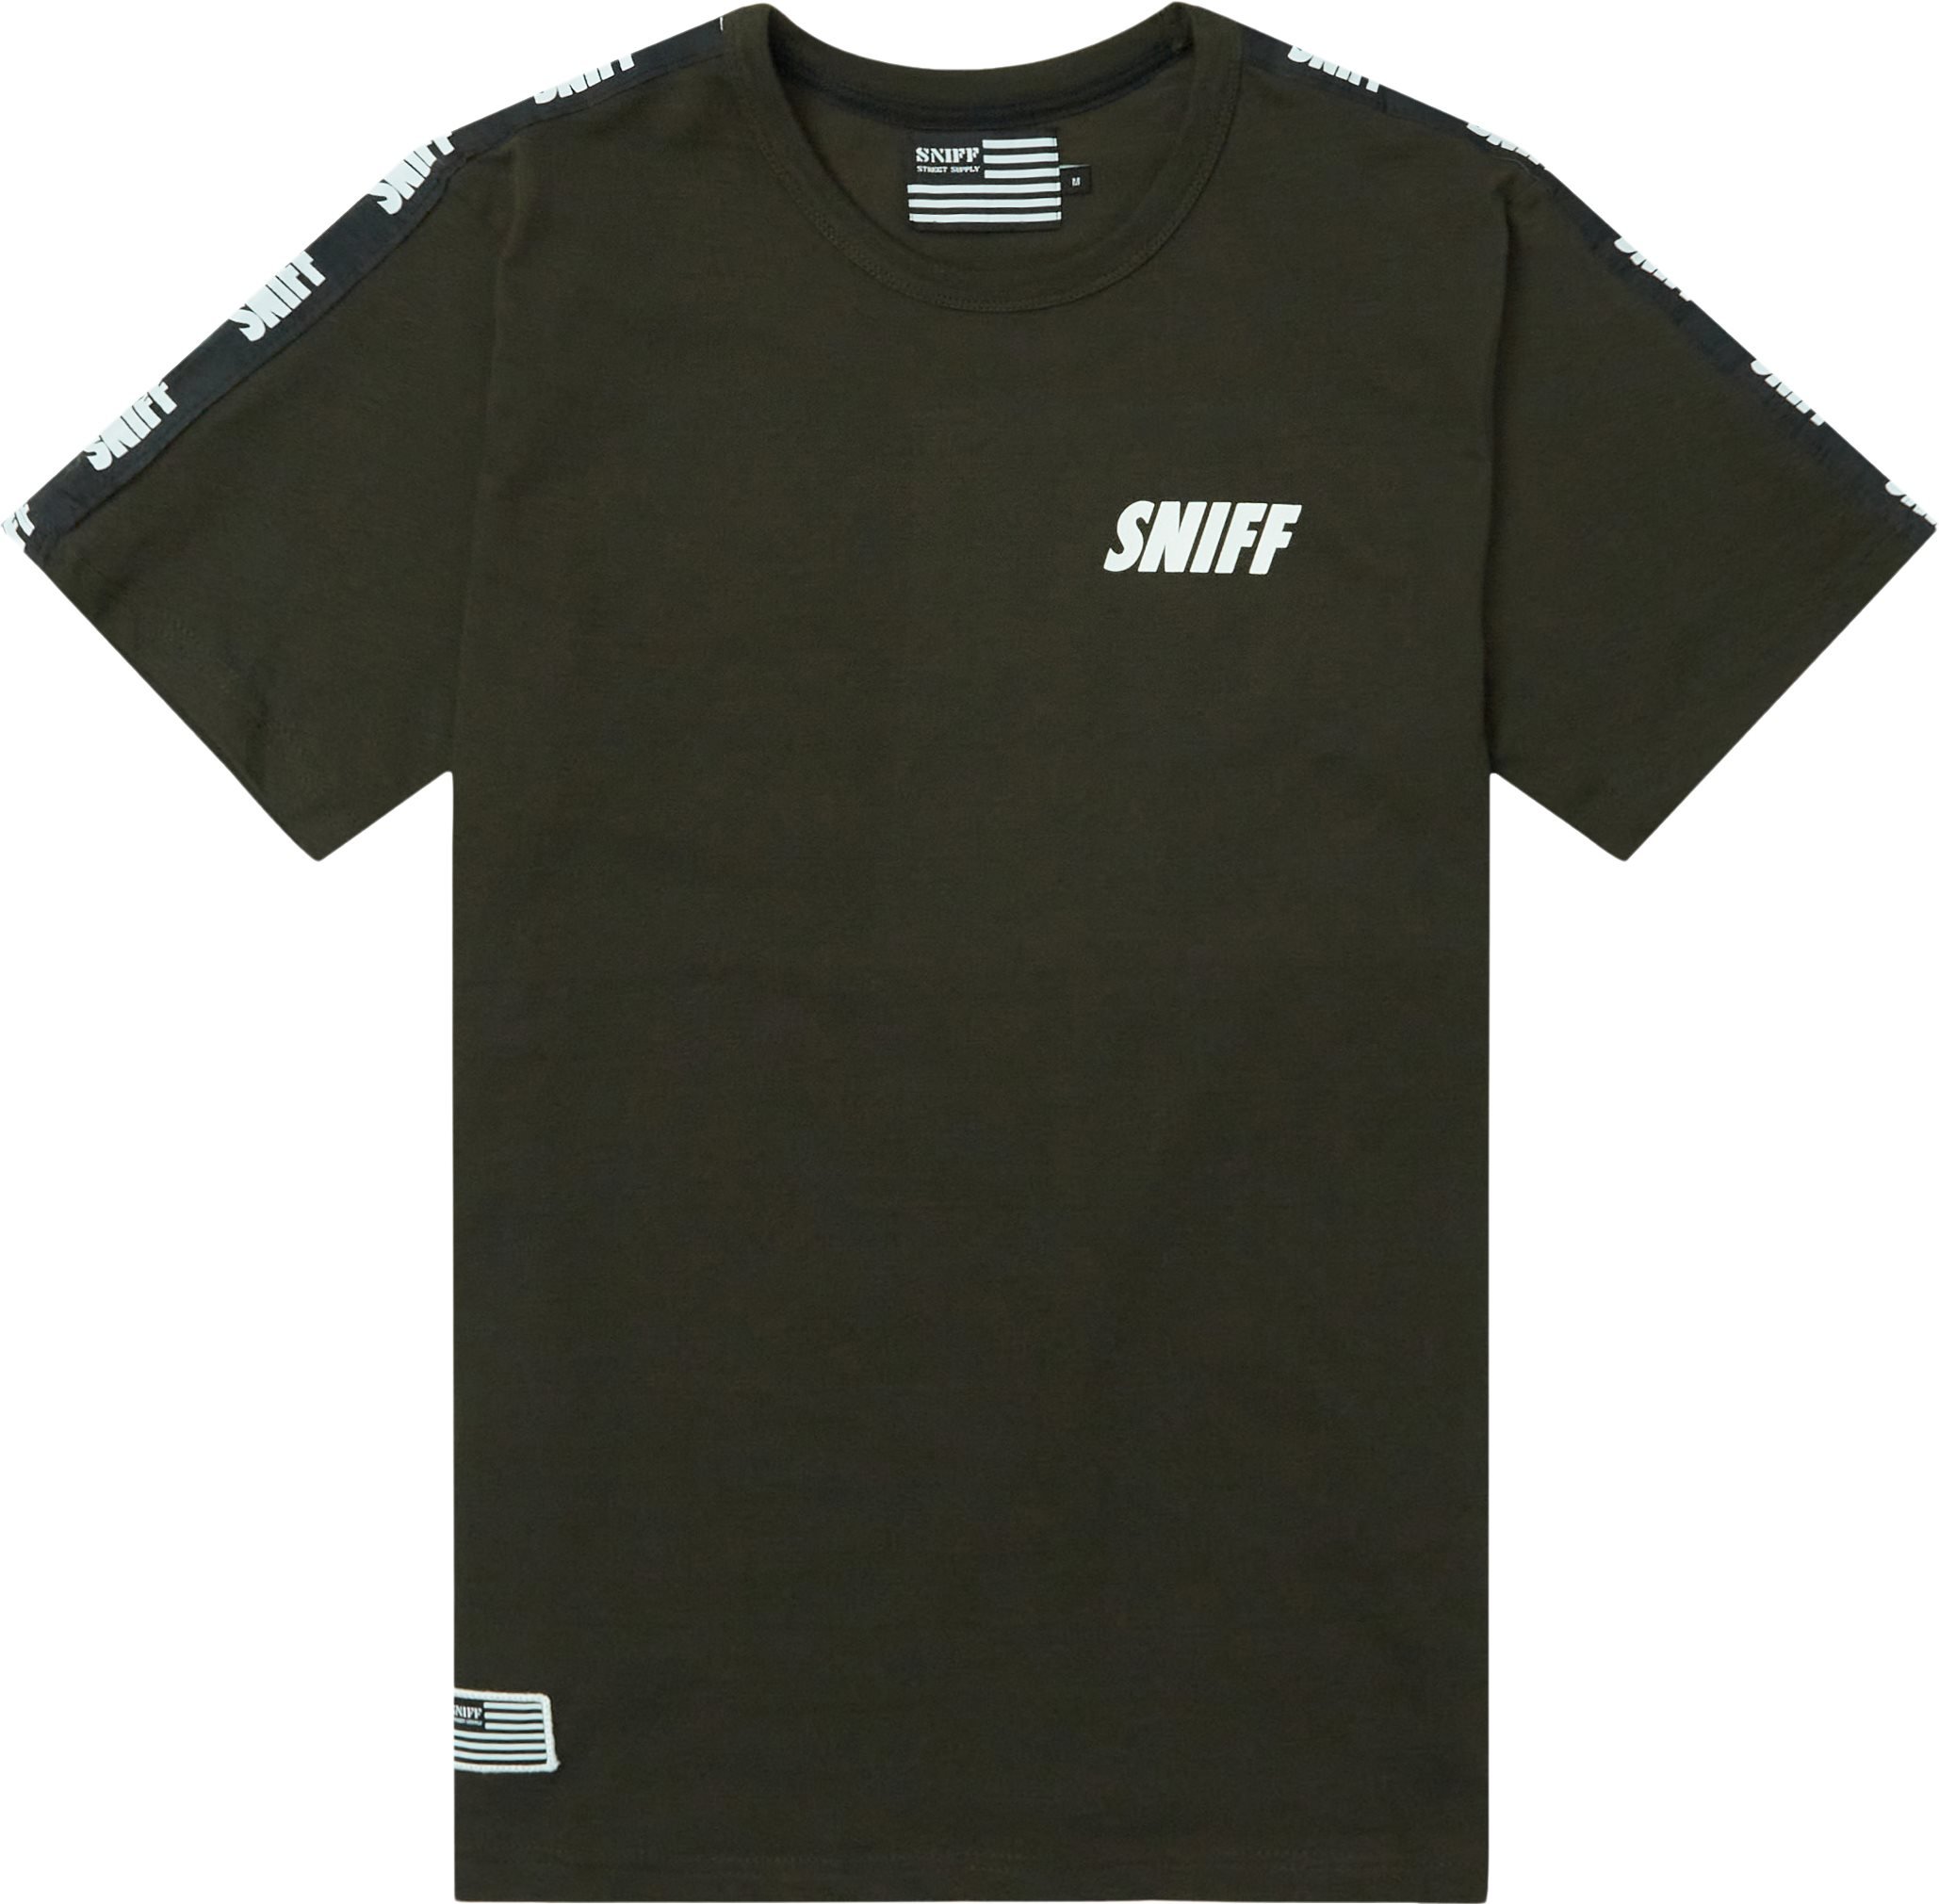 Pointe Tee - T-shirts - Regular fit - Army